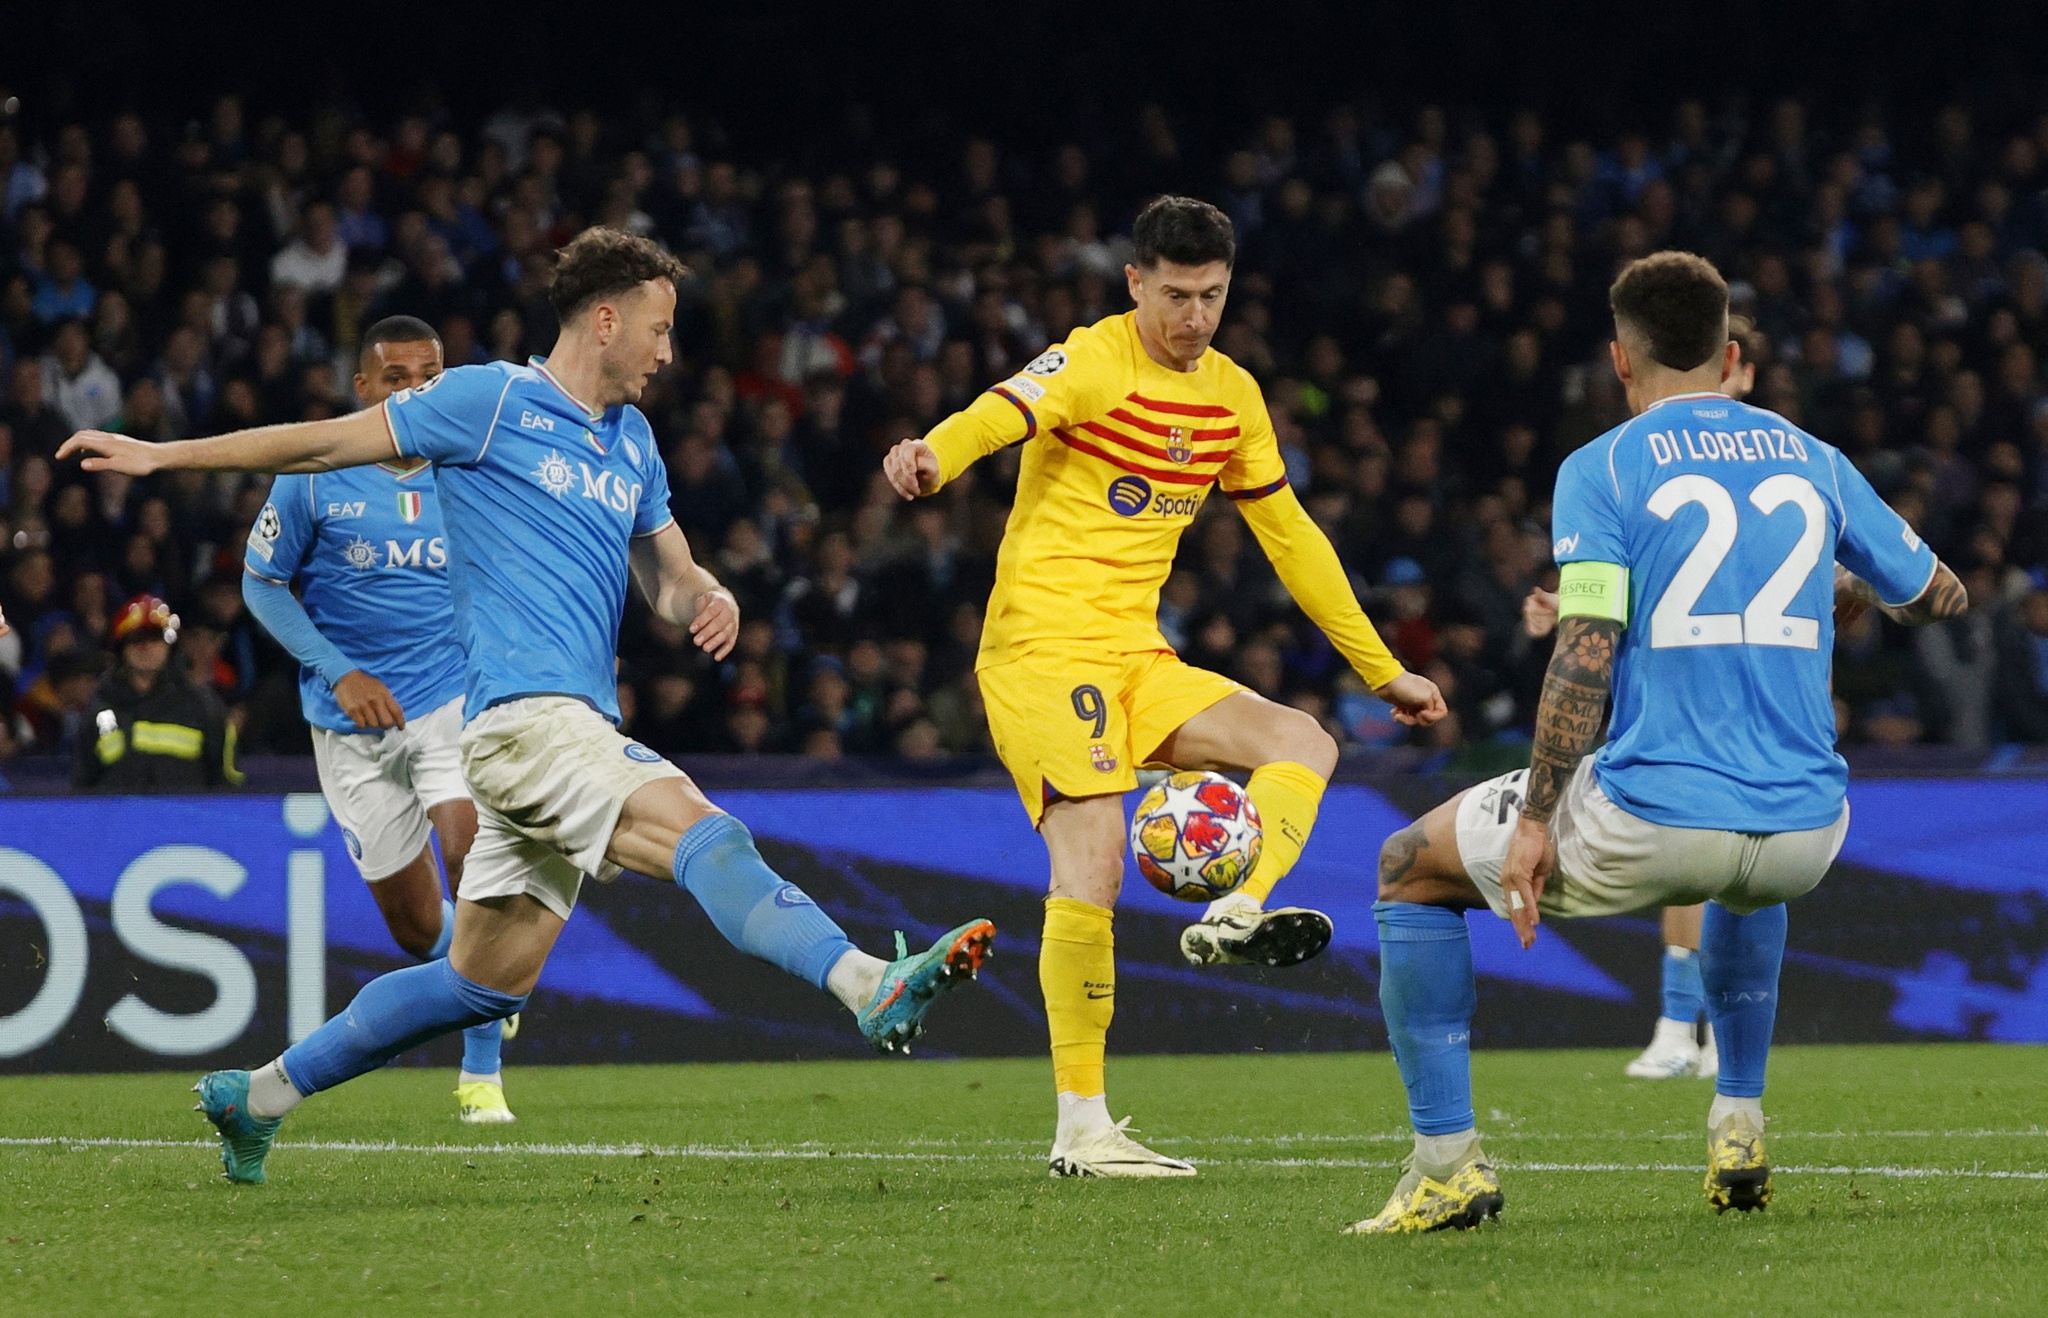 Barcelona and Naples showed that crisis is not an empty word  International football